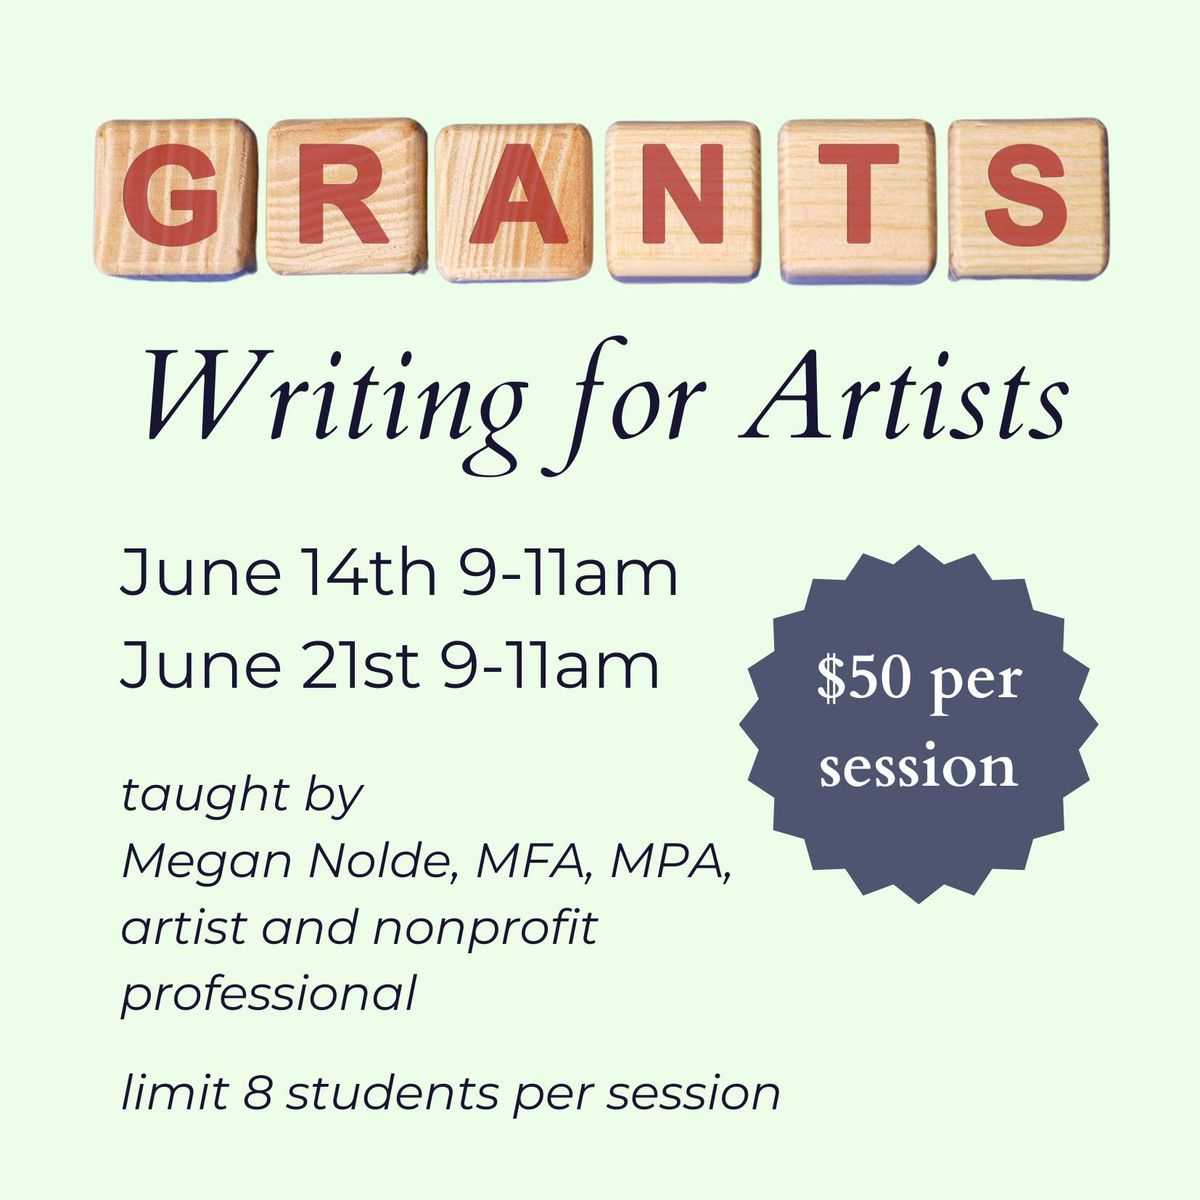 Grant-Writing for Artists